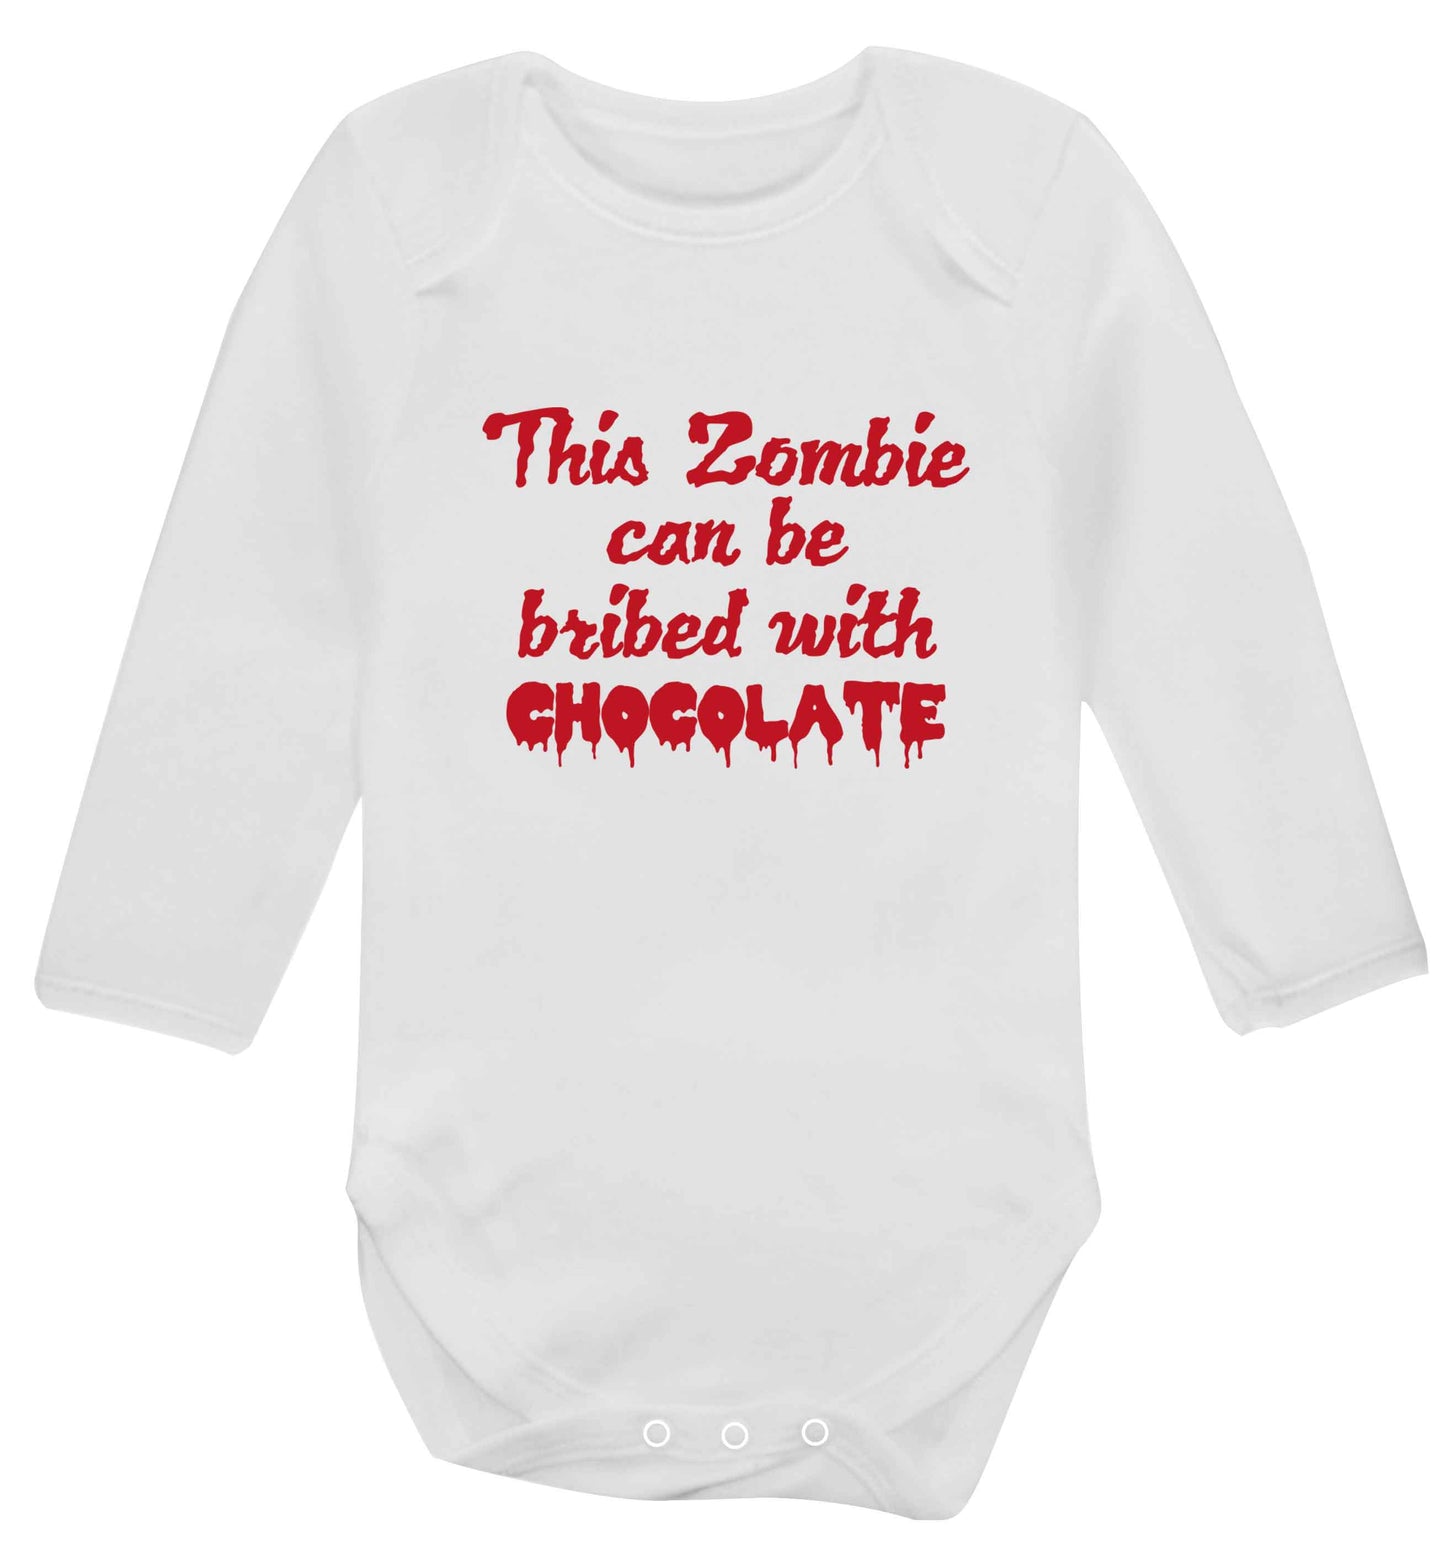 This zombie can be bribed with chocolate baby vest long sleeved white 6-12 months